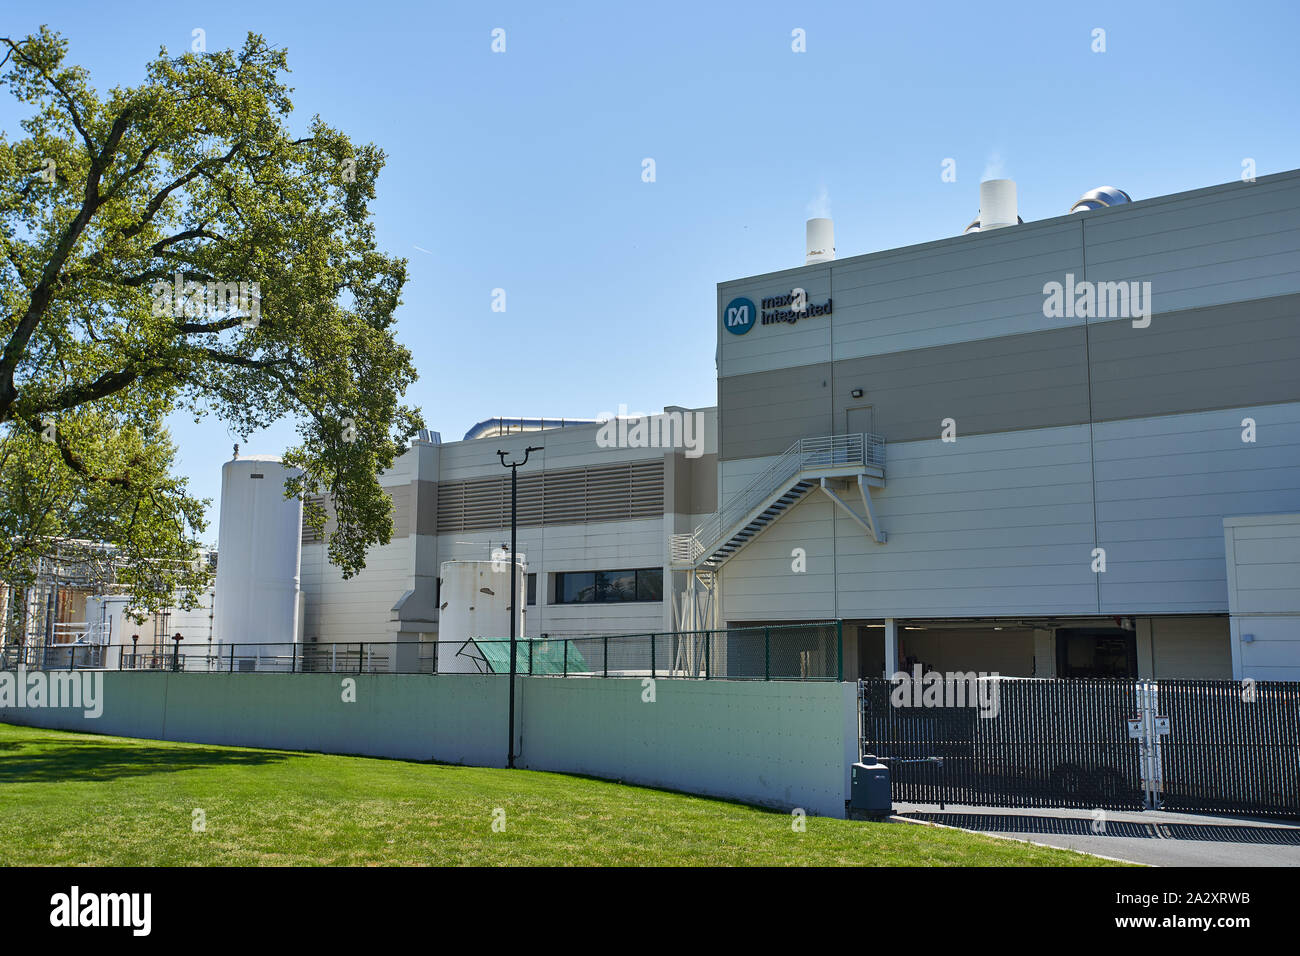 American integrated circuits manufacturer Maxim Integrated's Beaverton facility in Oregon, seen on Apr 30, 2019. Stock Photo